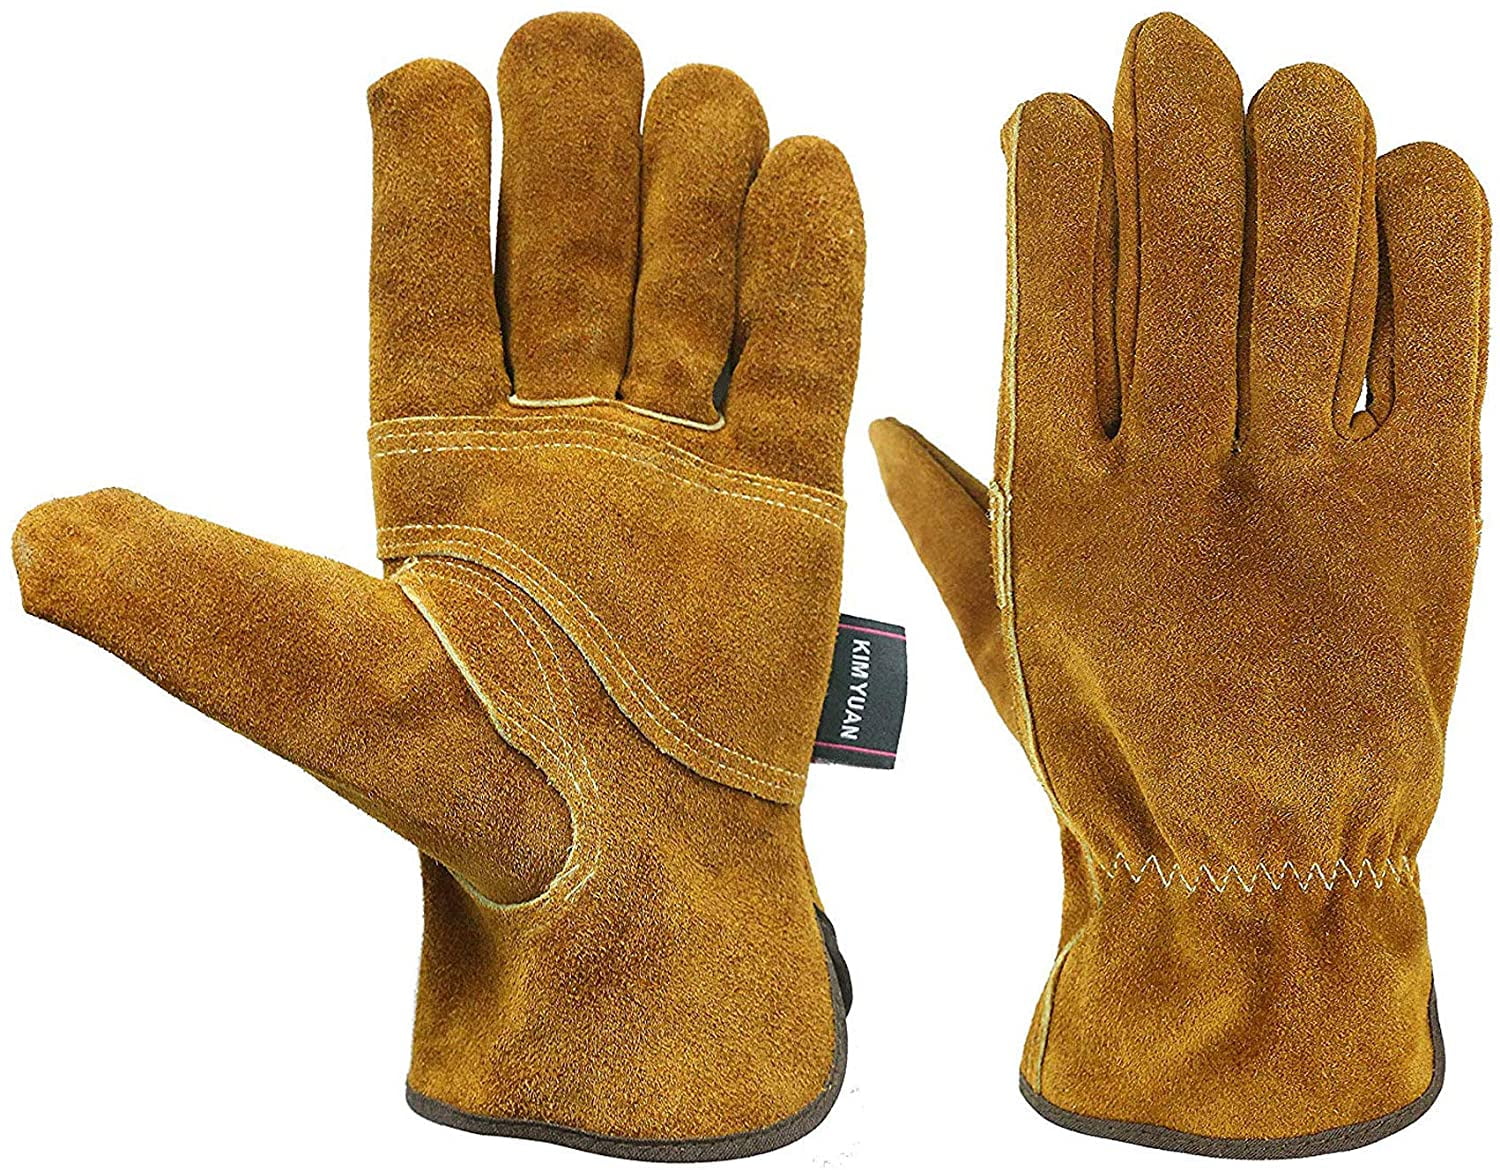 Sandy Brown New Falconry Glove Single Layer Ladies Palm Suede Leather 12" 